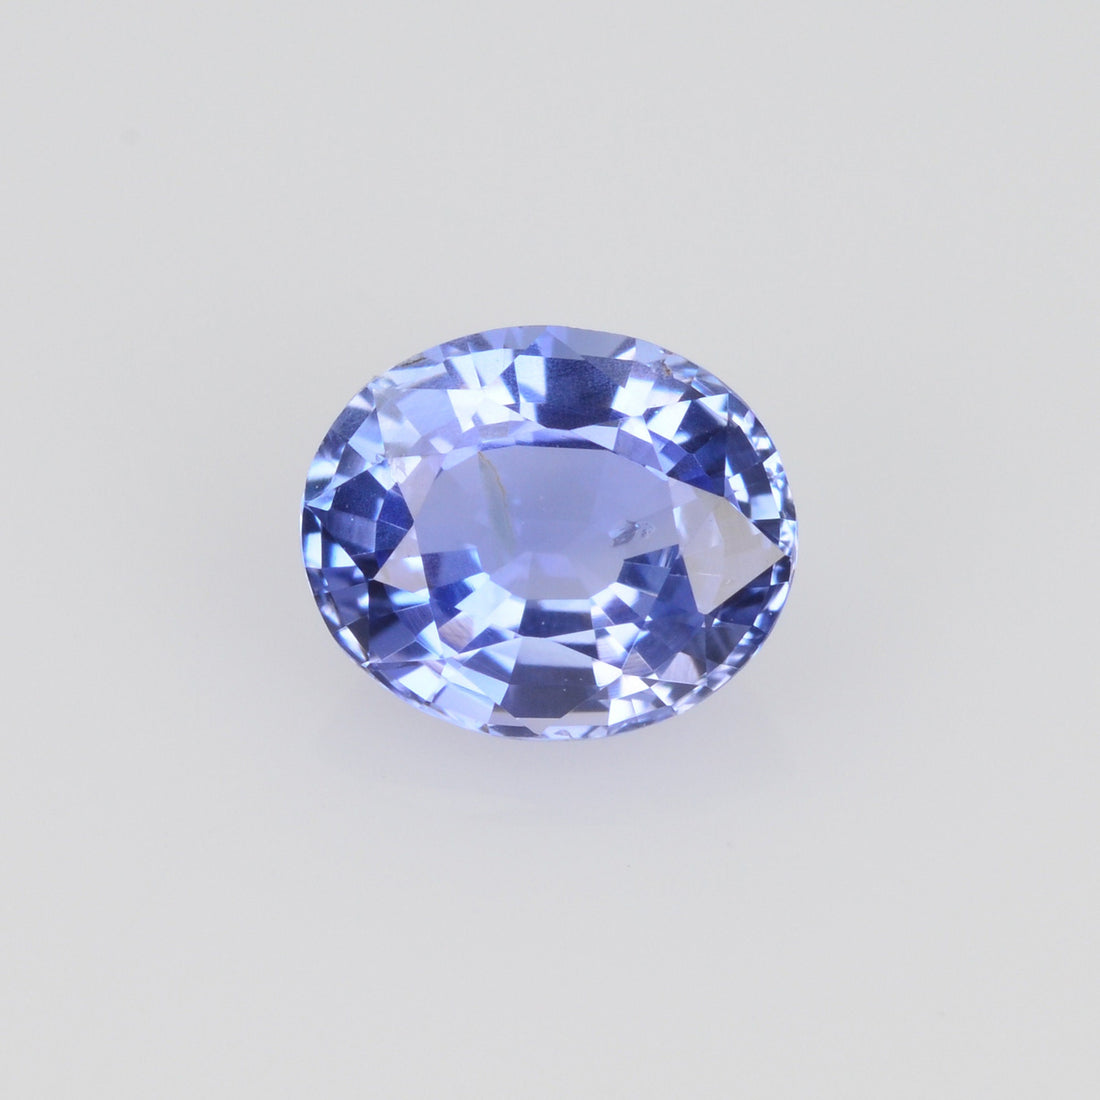 0.48-0.80 cts Unheated Natural Blue Sapphire Loose Gemstone Oval Cut